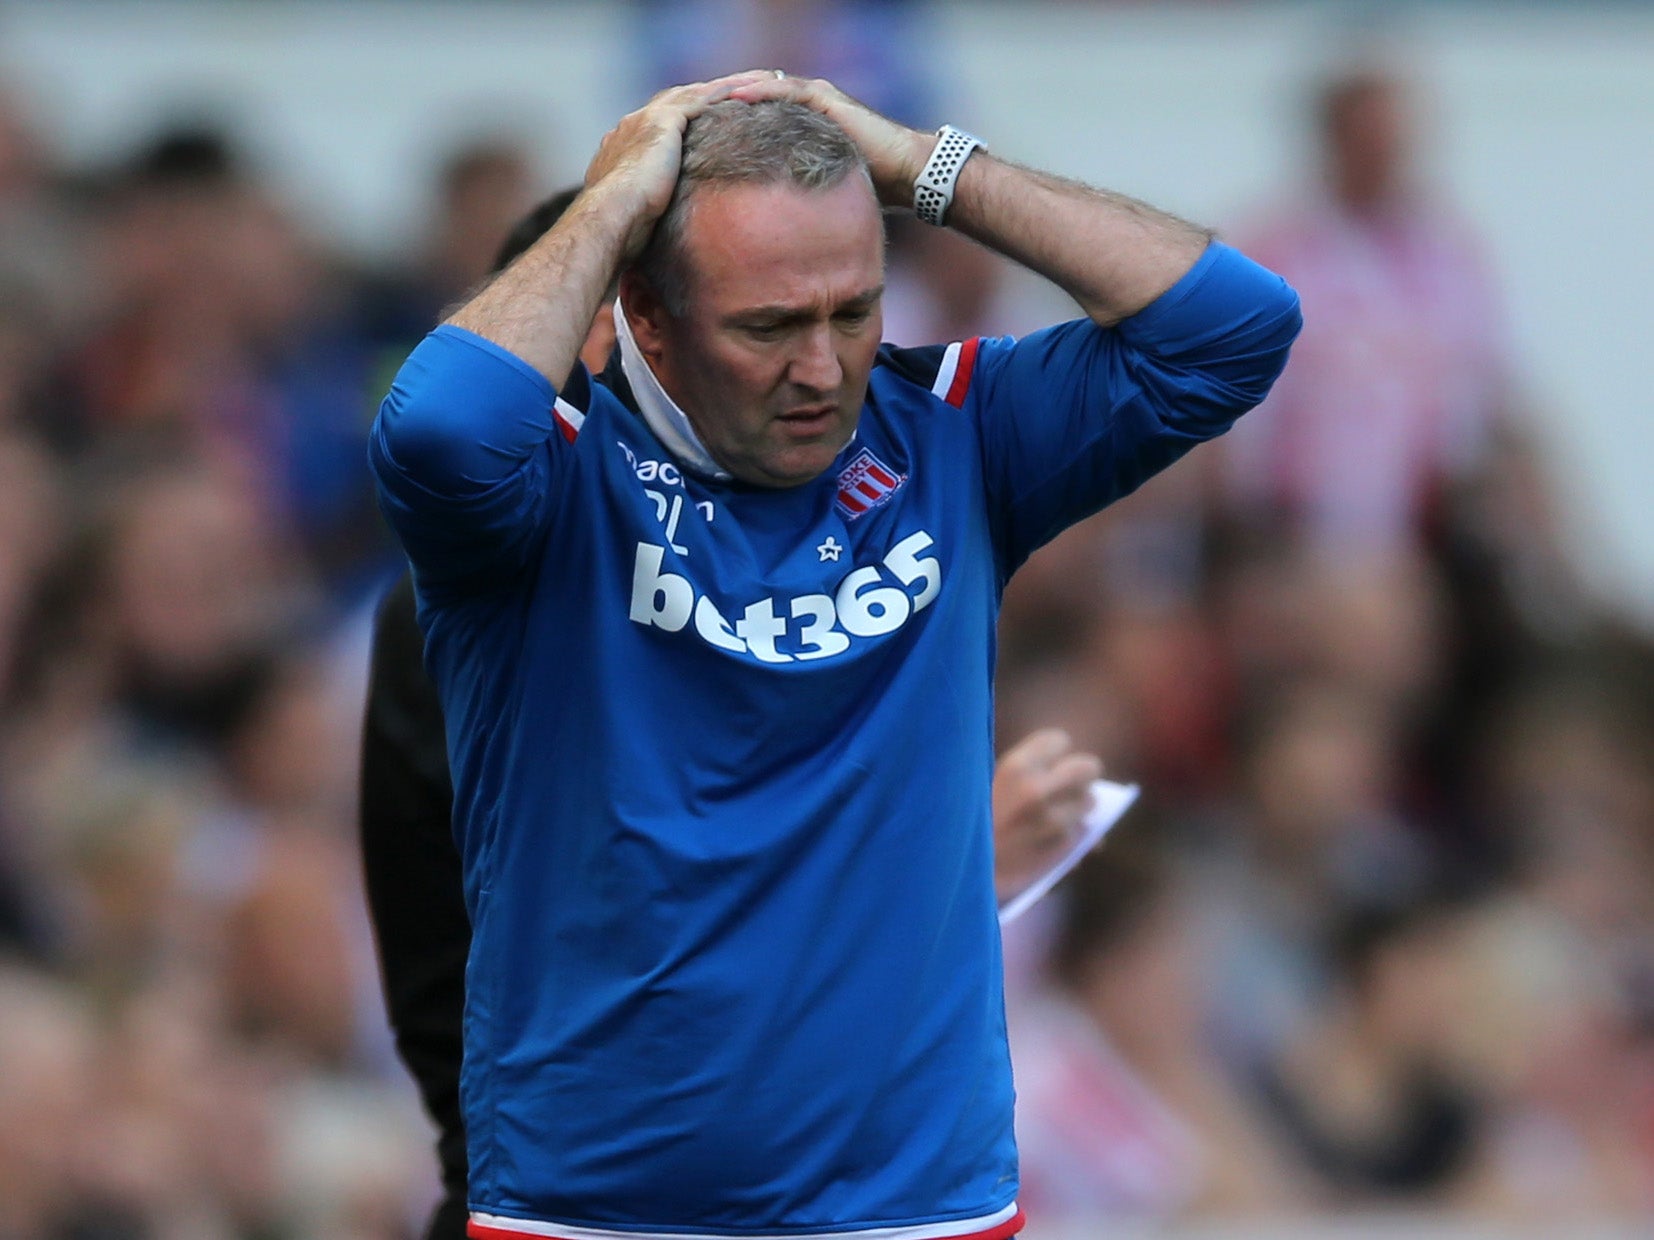 Lambert insisted he would stay with Stoke